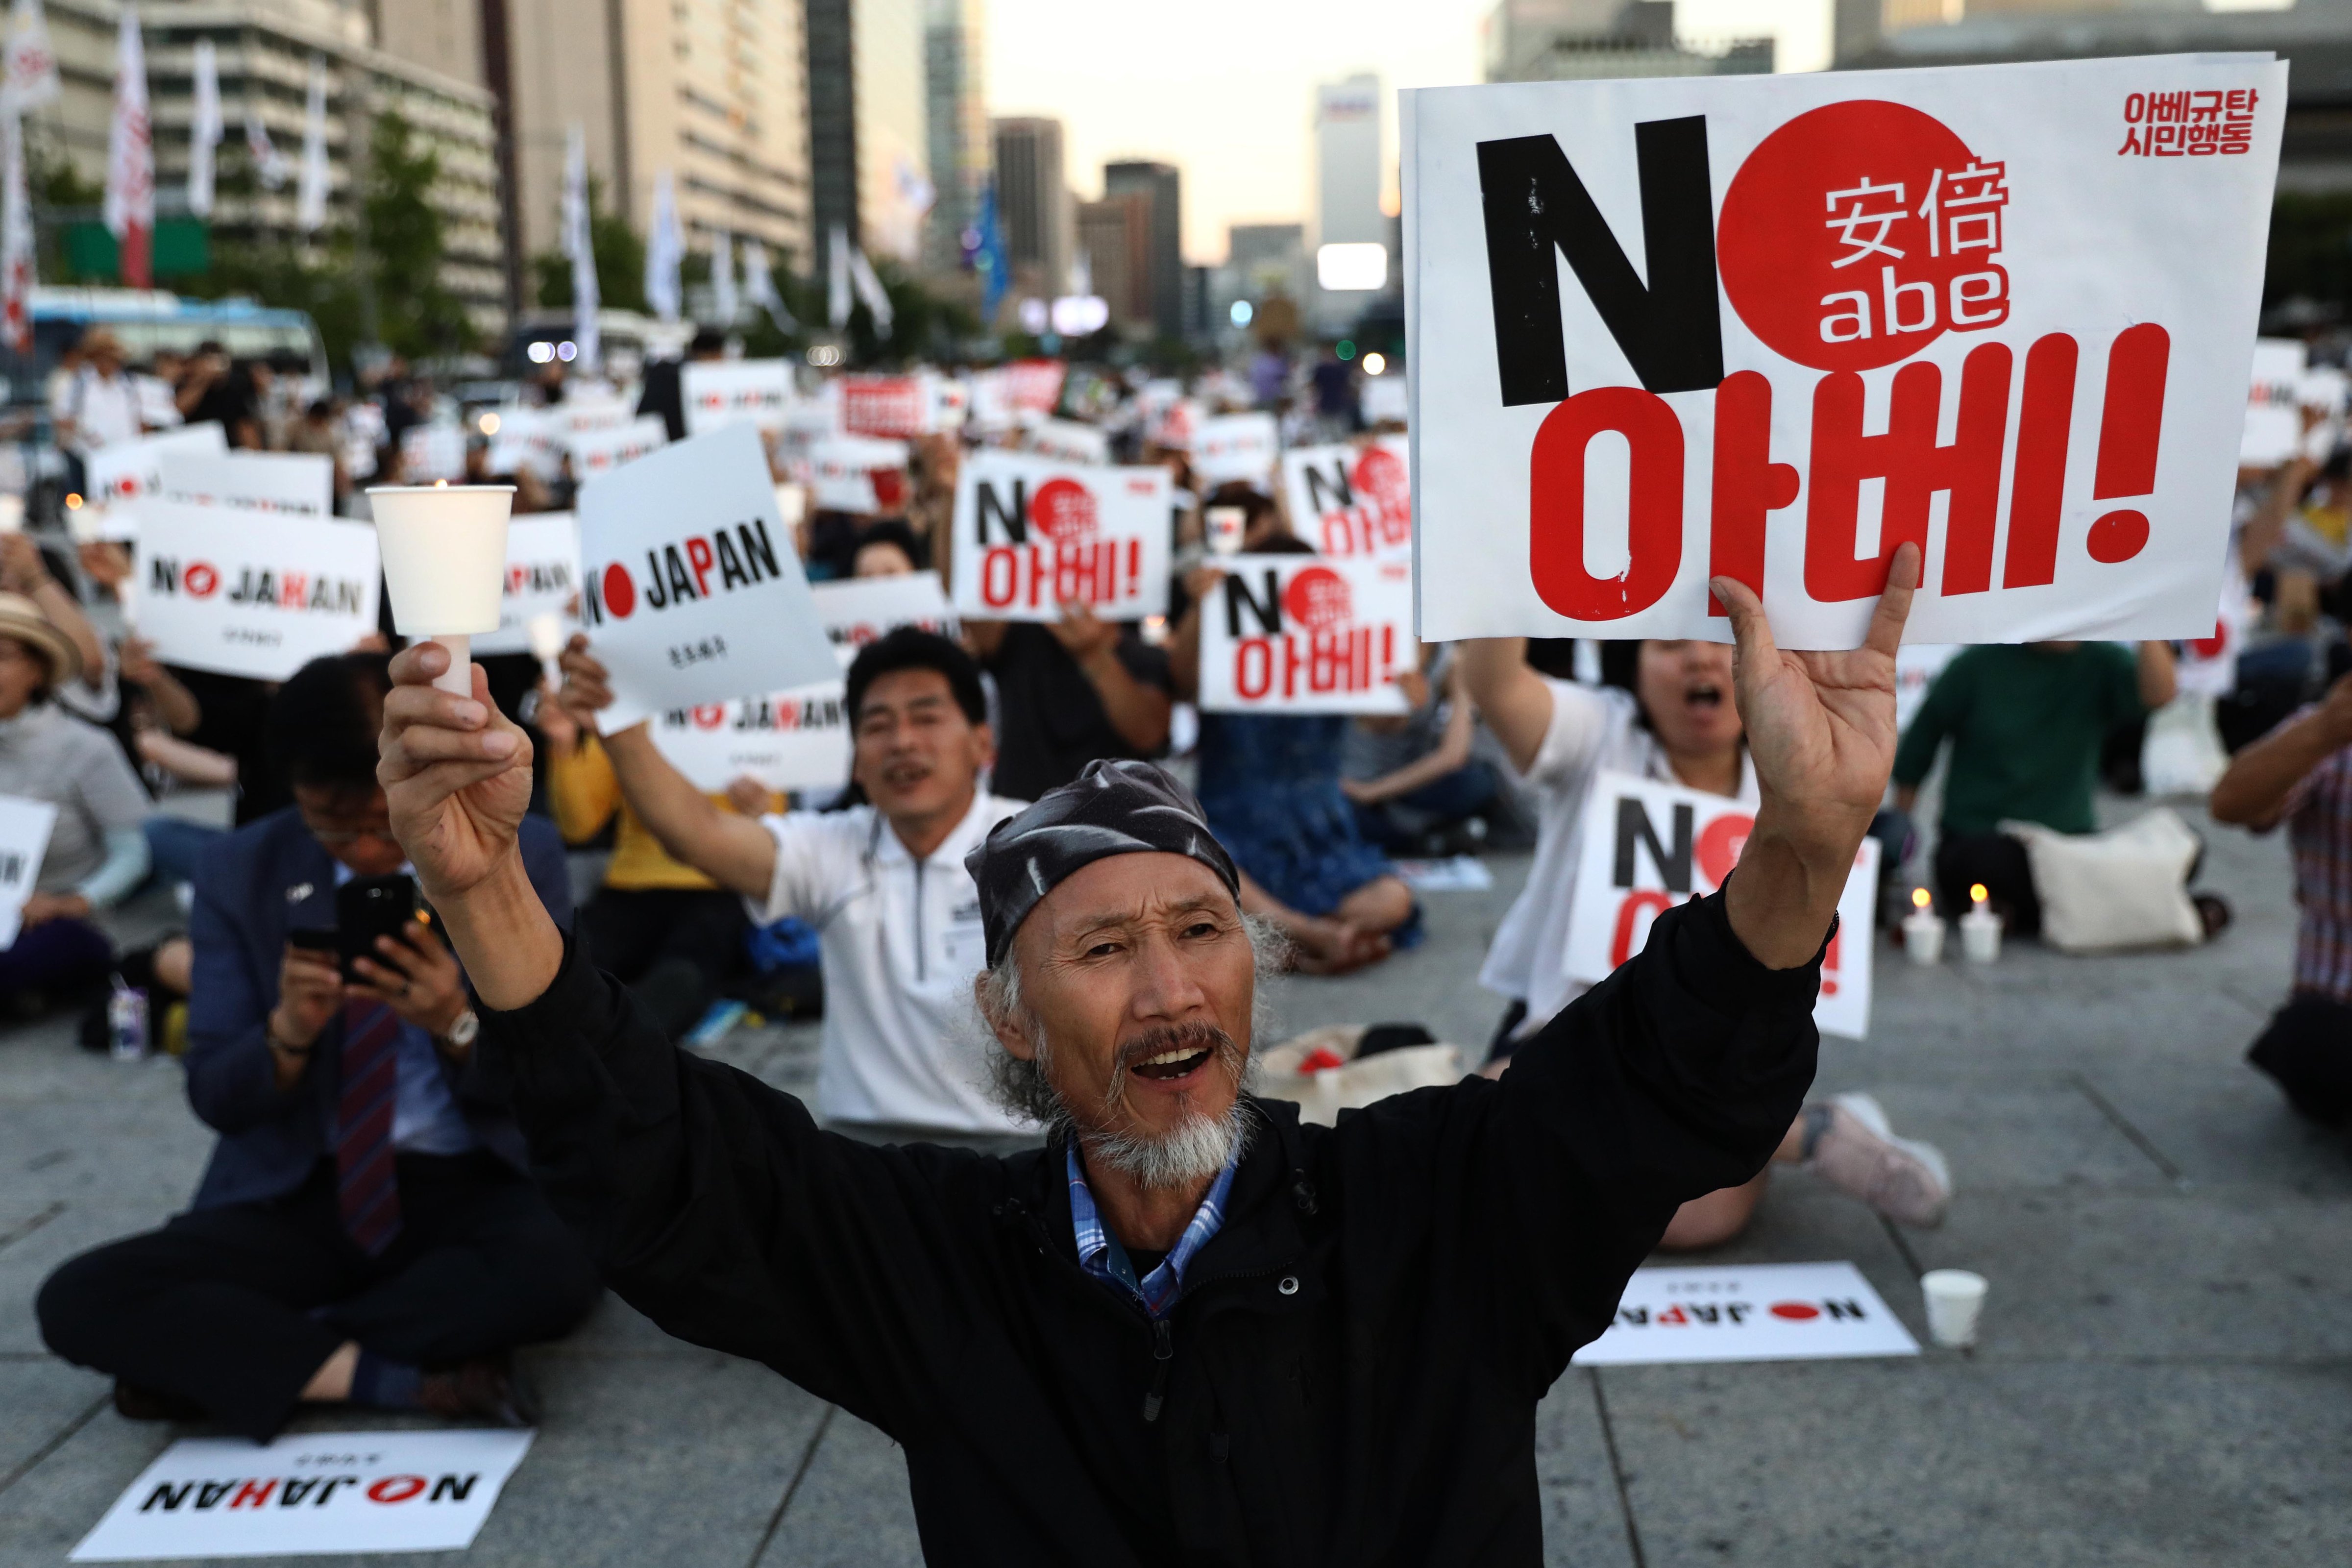 South Koreans participate in a rally to denounce Japan's new trade restrictions and Japanese Prime Minister Shinzo Abe on August 24, 2019 in Seoul, South Korea. The bilateral relationship between Japan and South Korea has worsened recently, with the Japanese government's decision to remove South Korea from so-called 'white list' of trade restriction. Some Korean protesters, students and conservative shop owners have started boycotting Japanese products. (Chung Sung Jun – Getty Images)